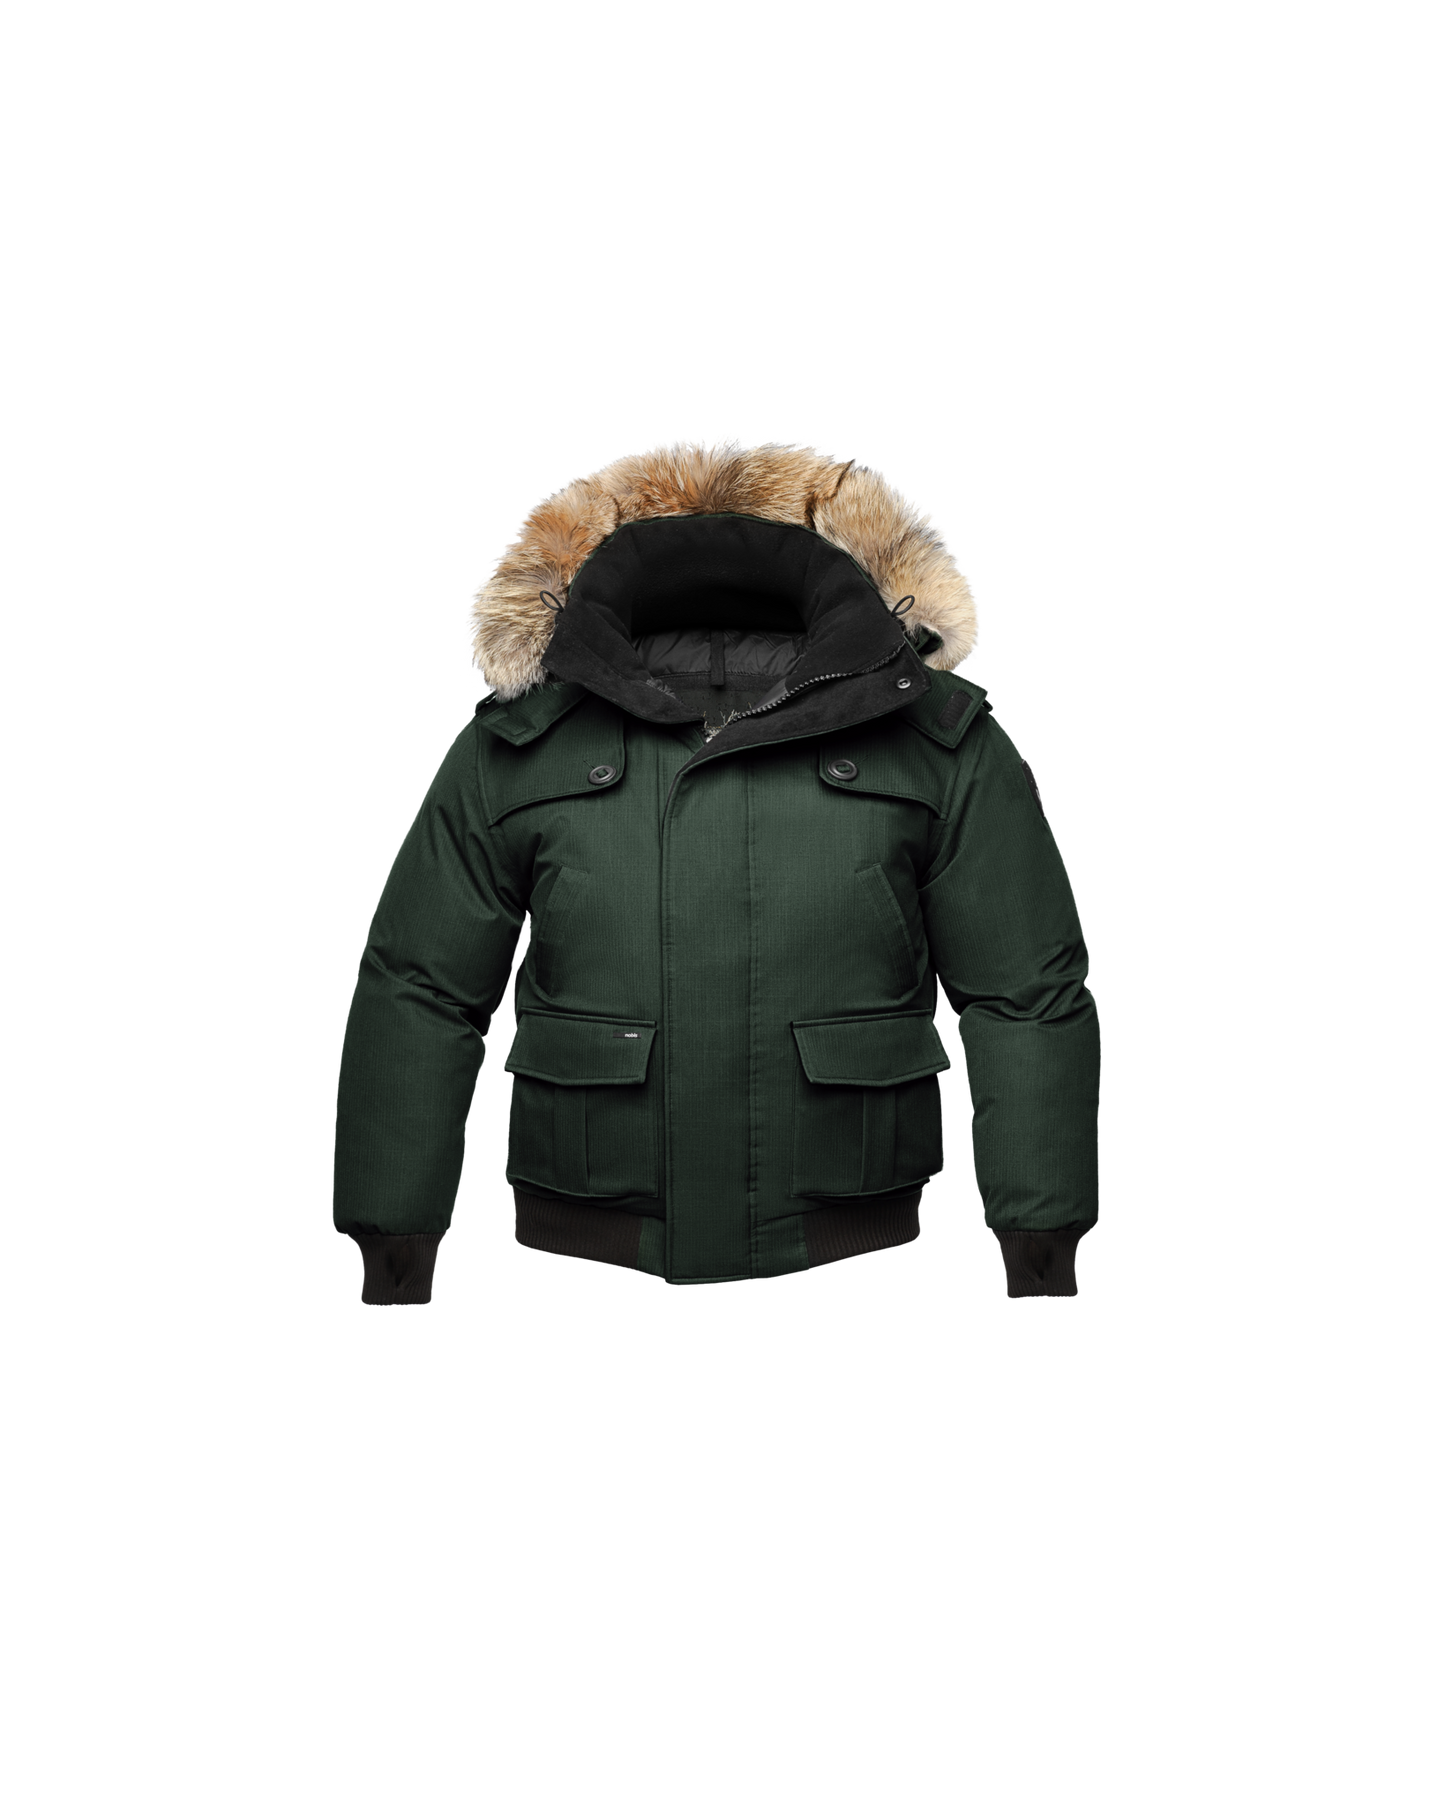 Kid's waist length down bomber jacket with fur trim hood in CH Forest